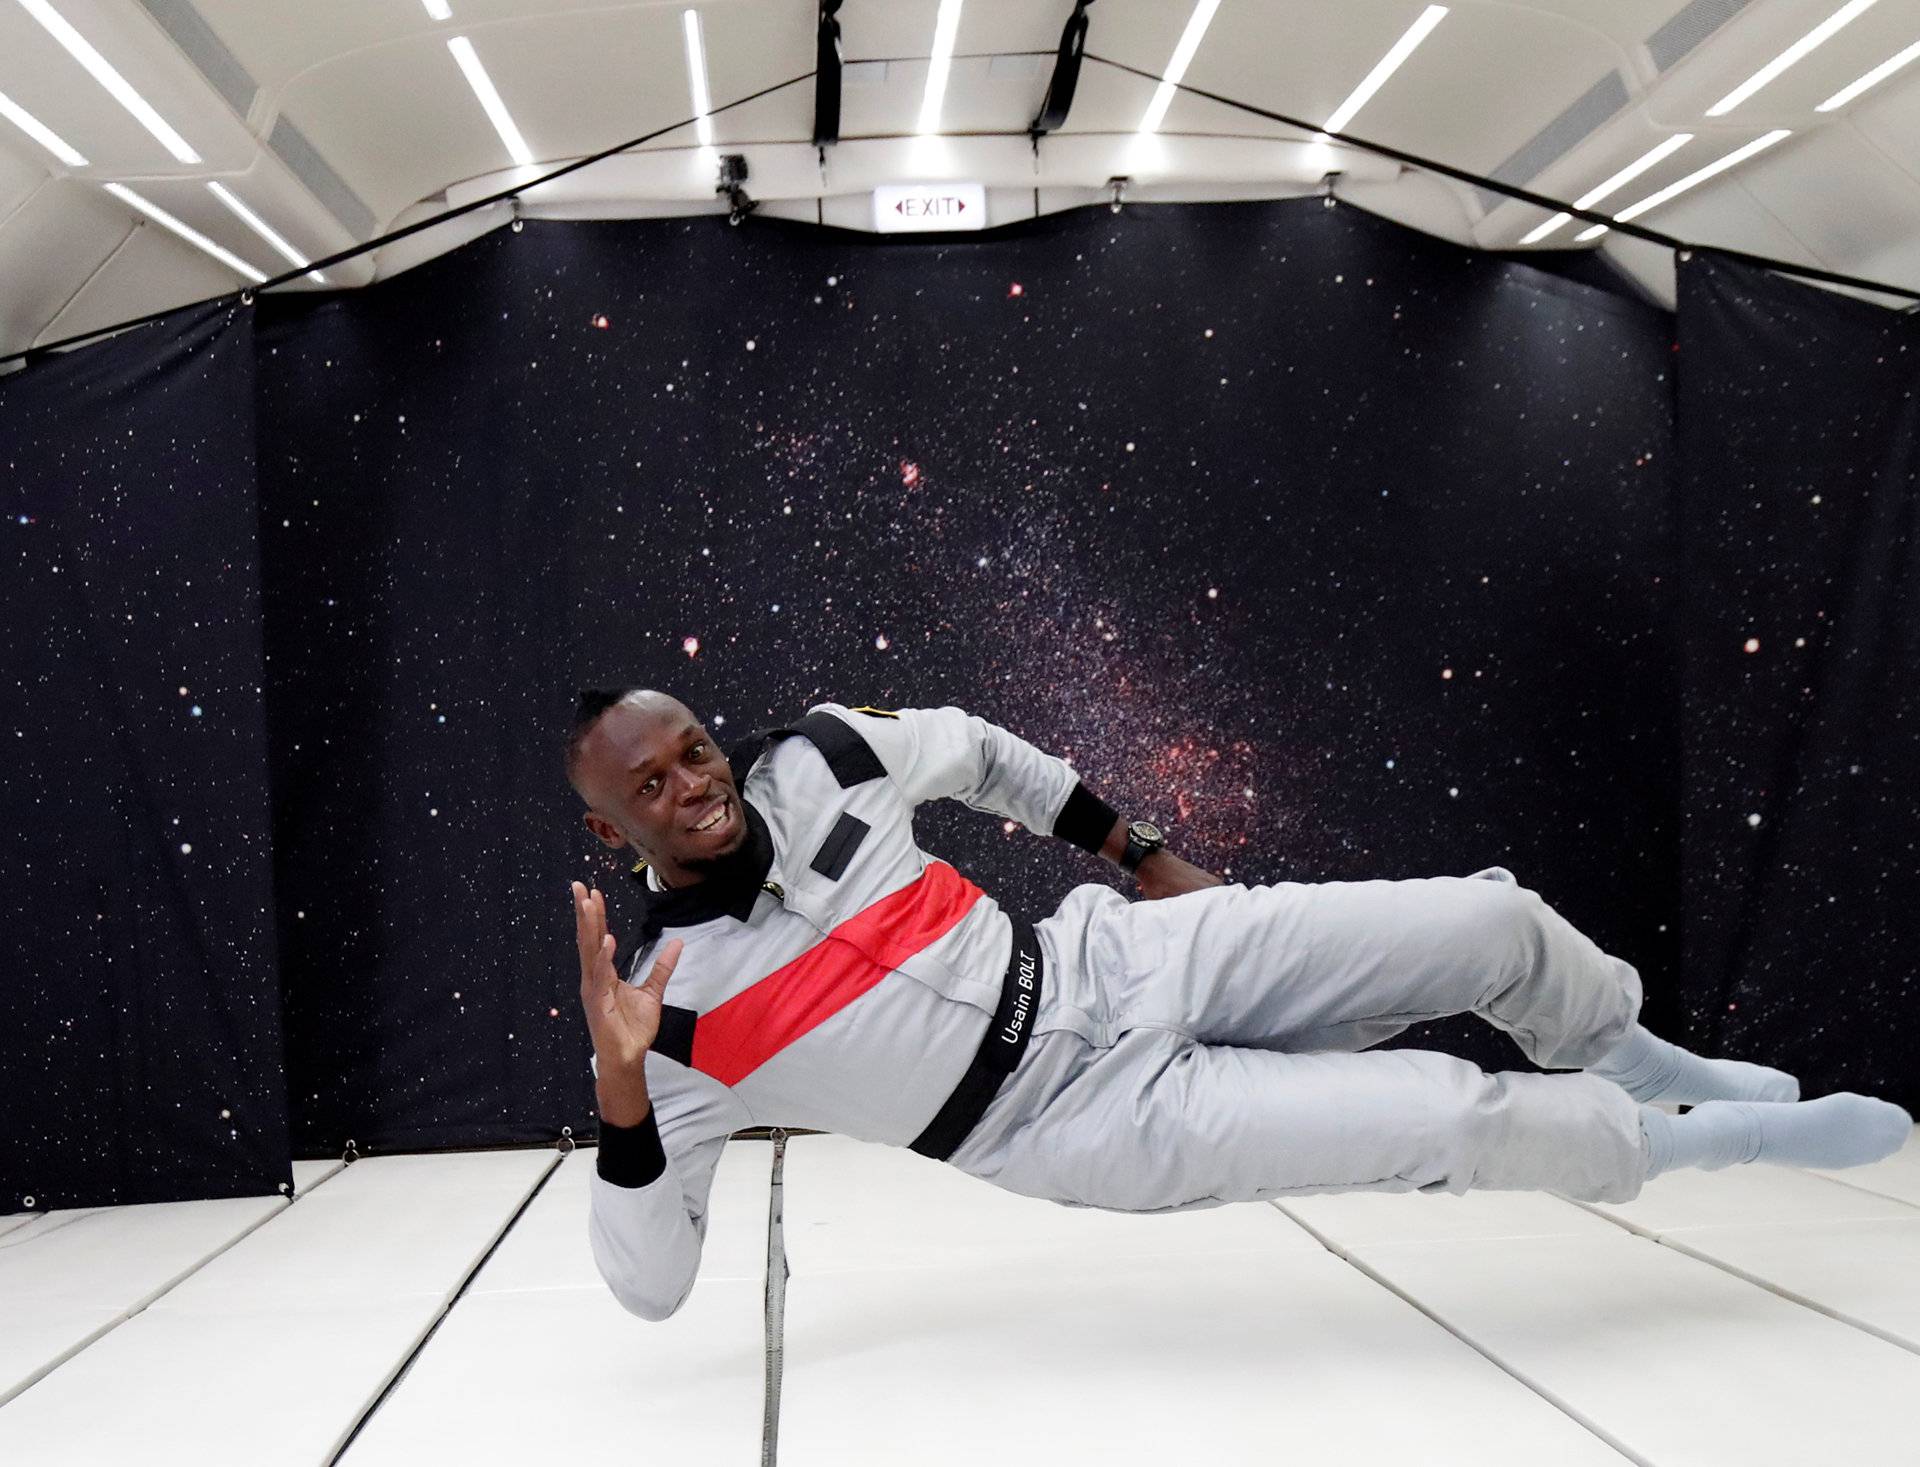 Retired sprinter Usain Bolt poses as he enjoys zero gravity conditions during a flight in a specially modified plane above Reims